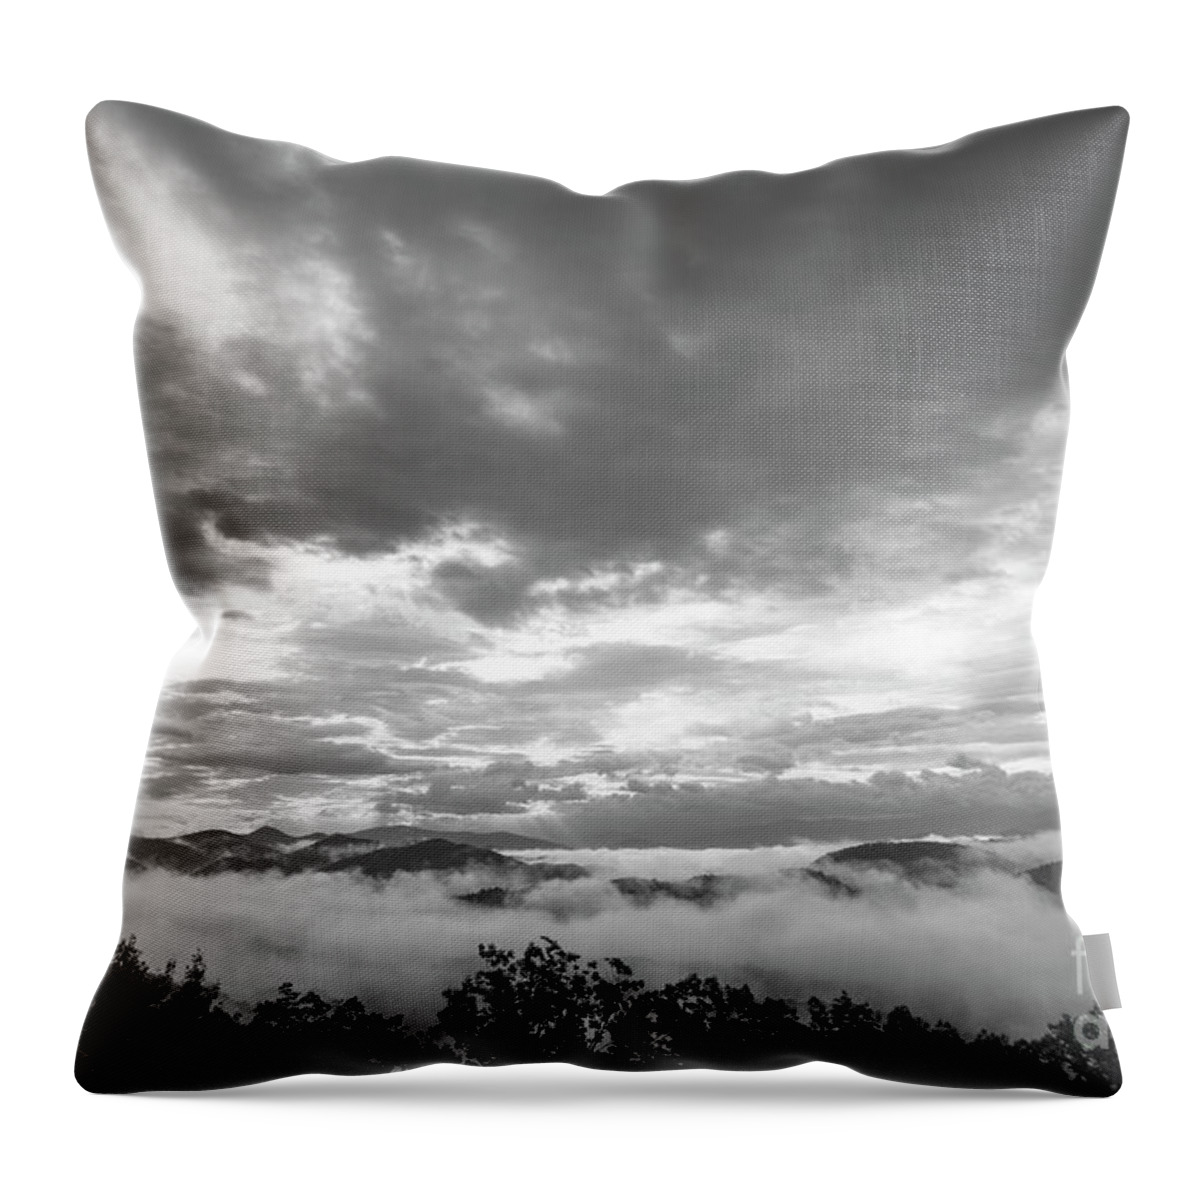 Smoky Mountains Throw Pillow featuring the photograph Foggy Mountain Morning by Mike Eingle